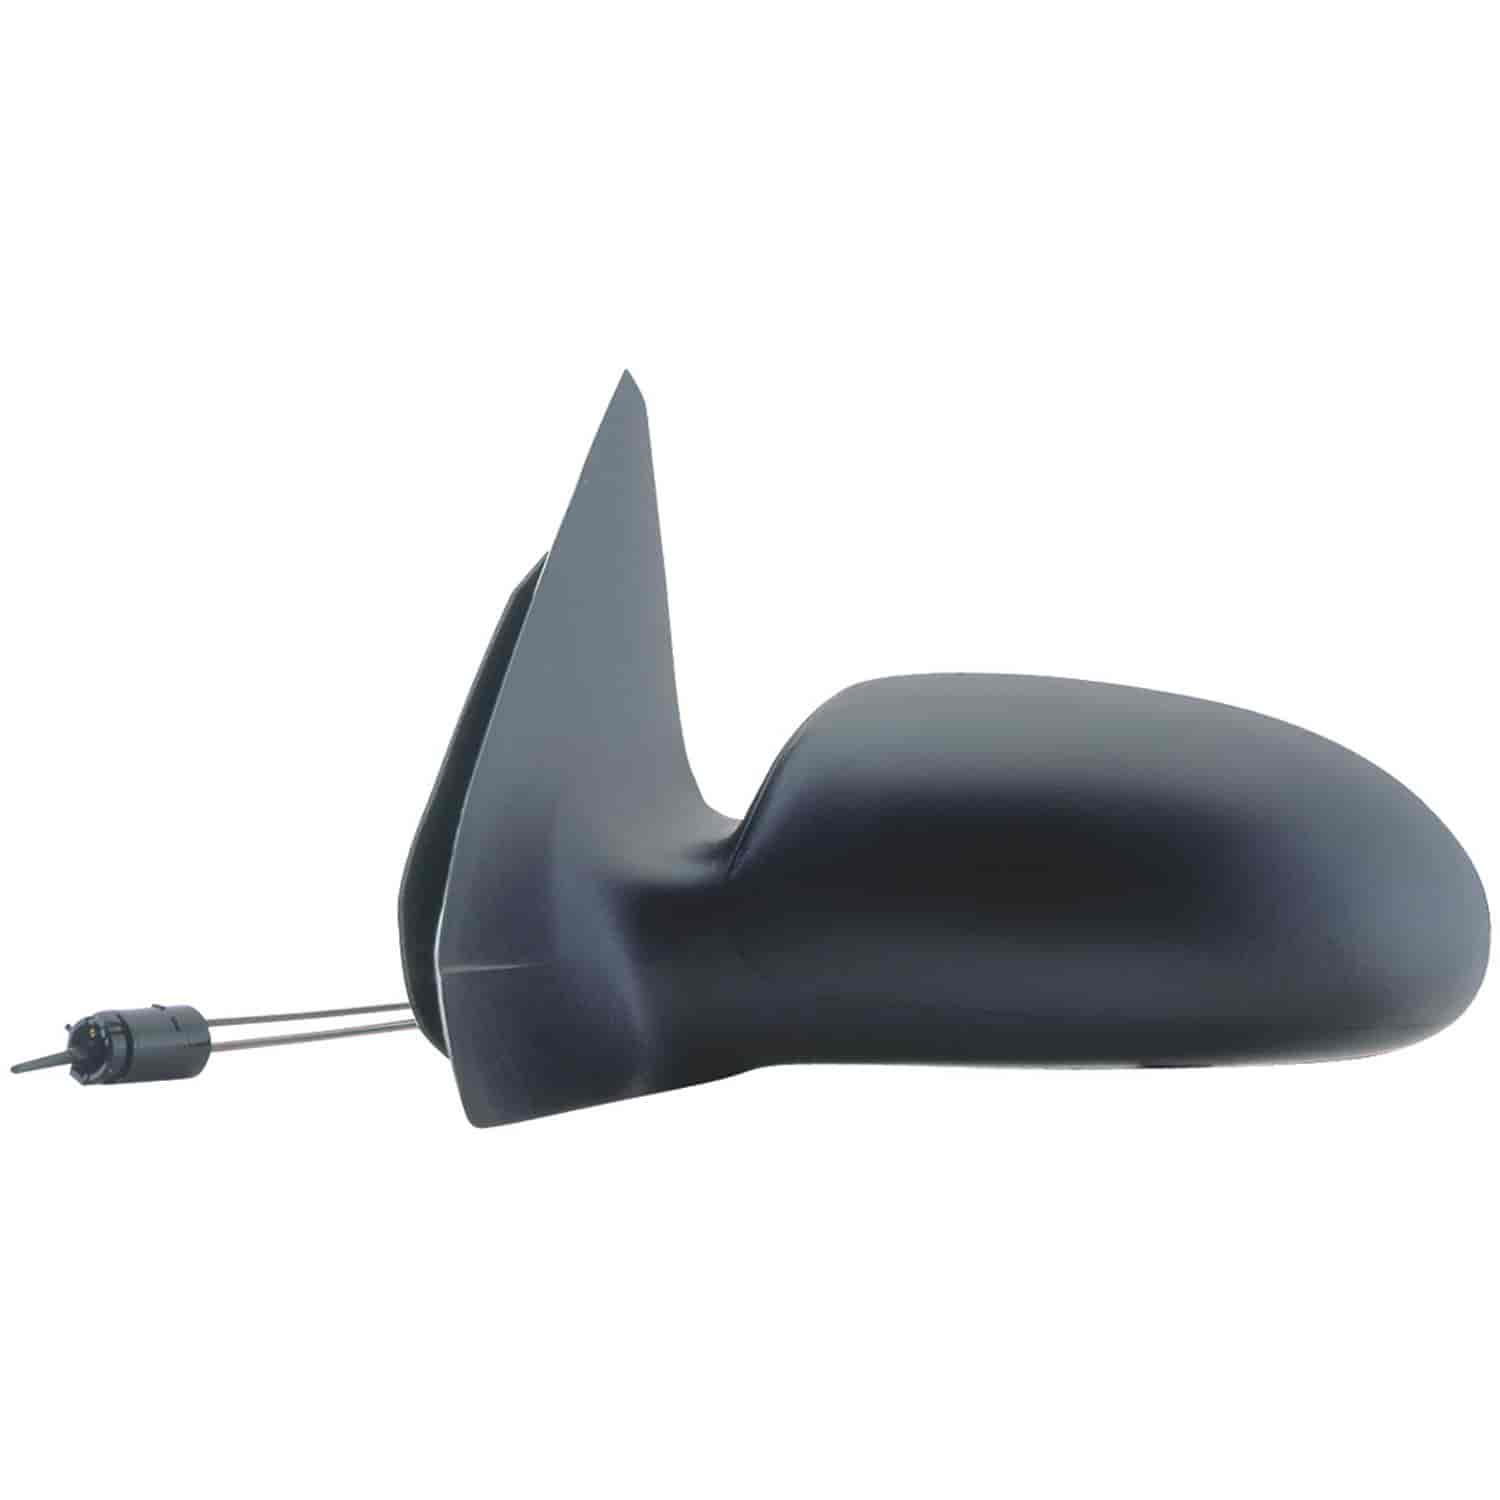 OEM Style Replacement mirror for 02-07 Ford Focus driver side mirror tested to fit and function like